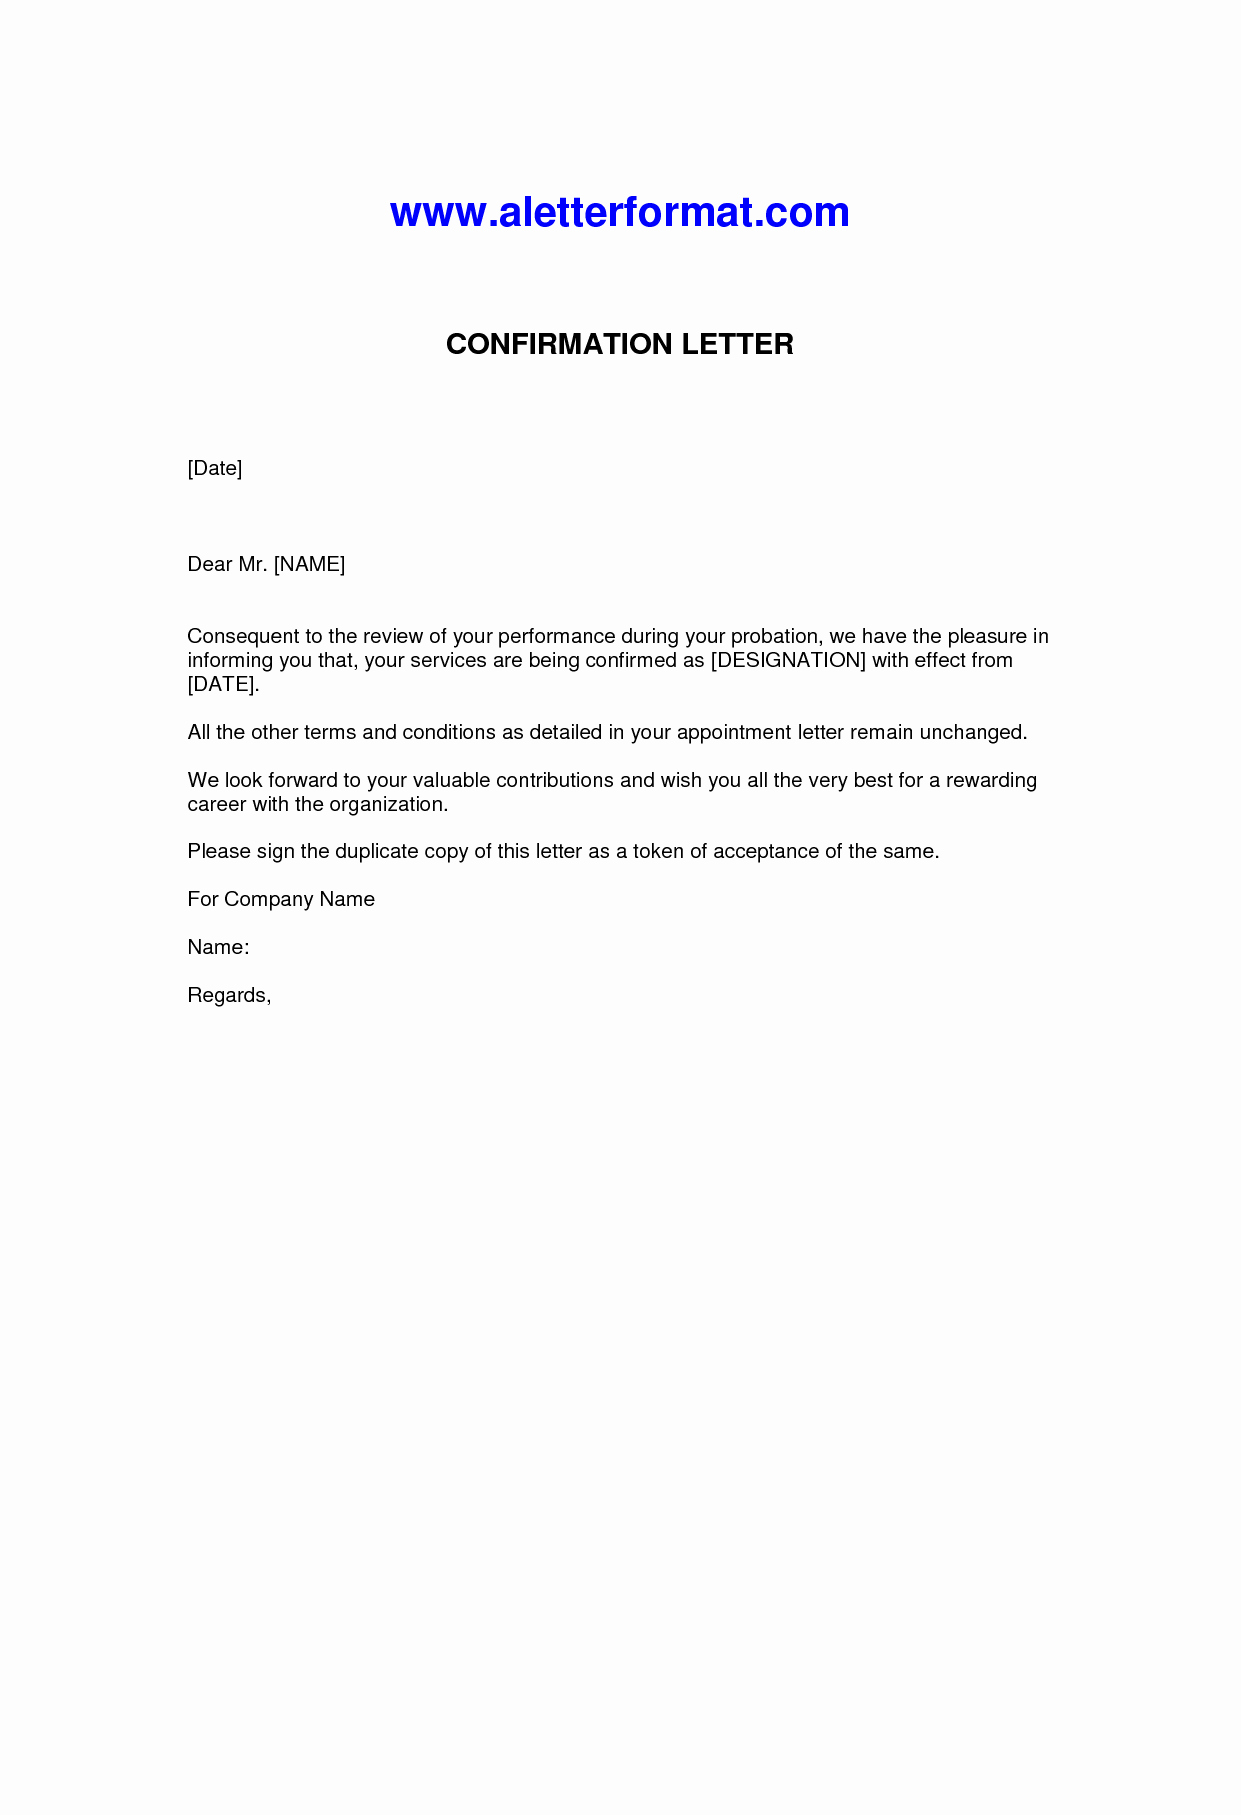 Proof Of Employment Letter Sample Beautiful Letter Confirmation Employment